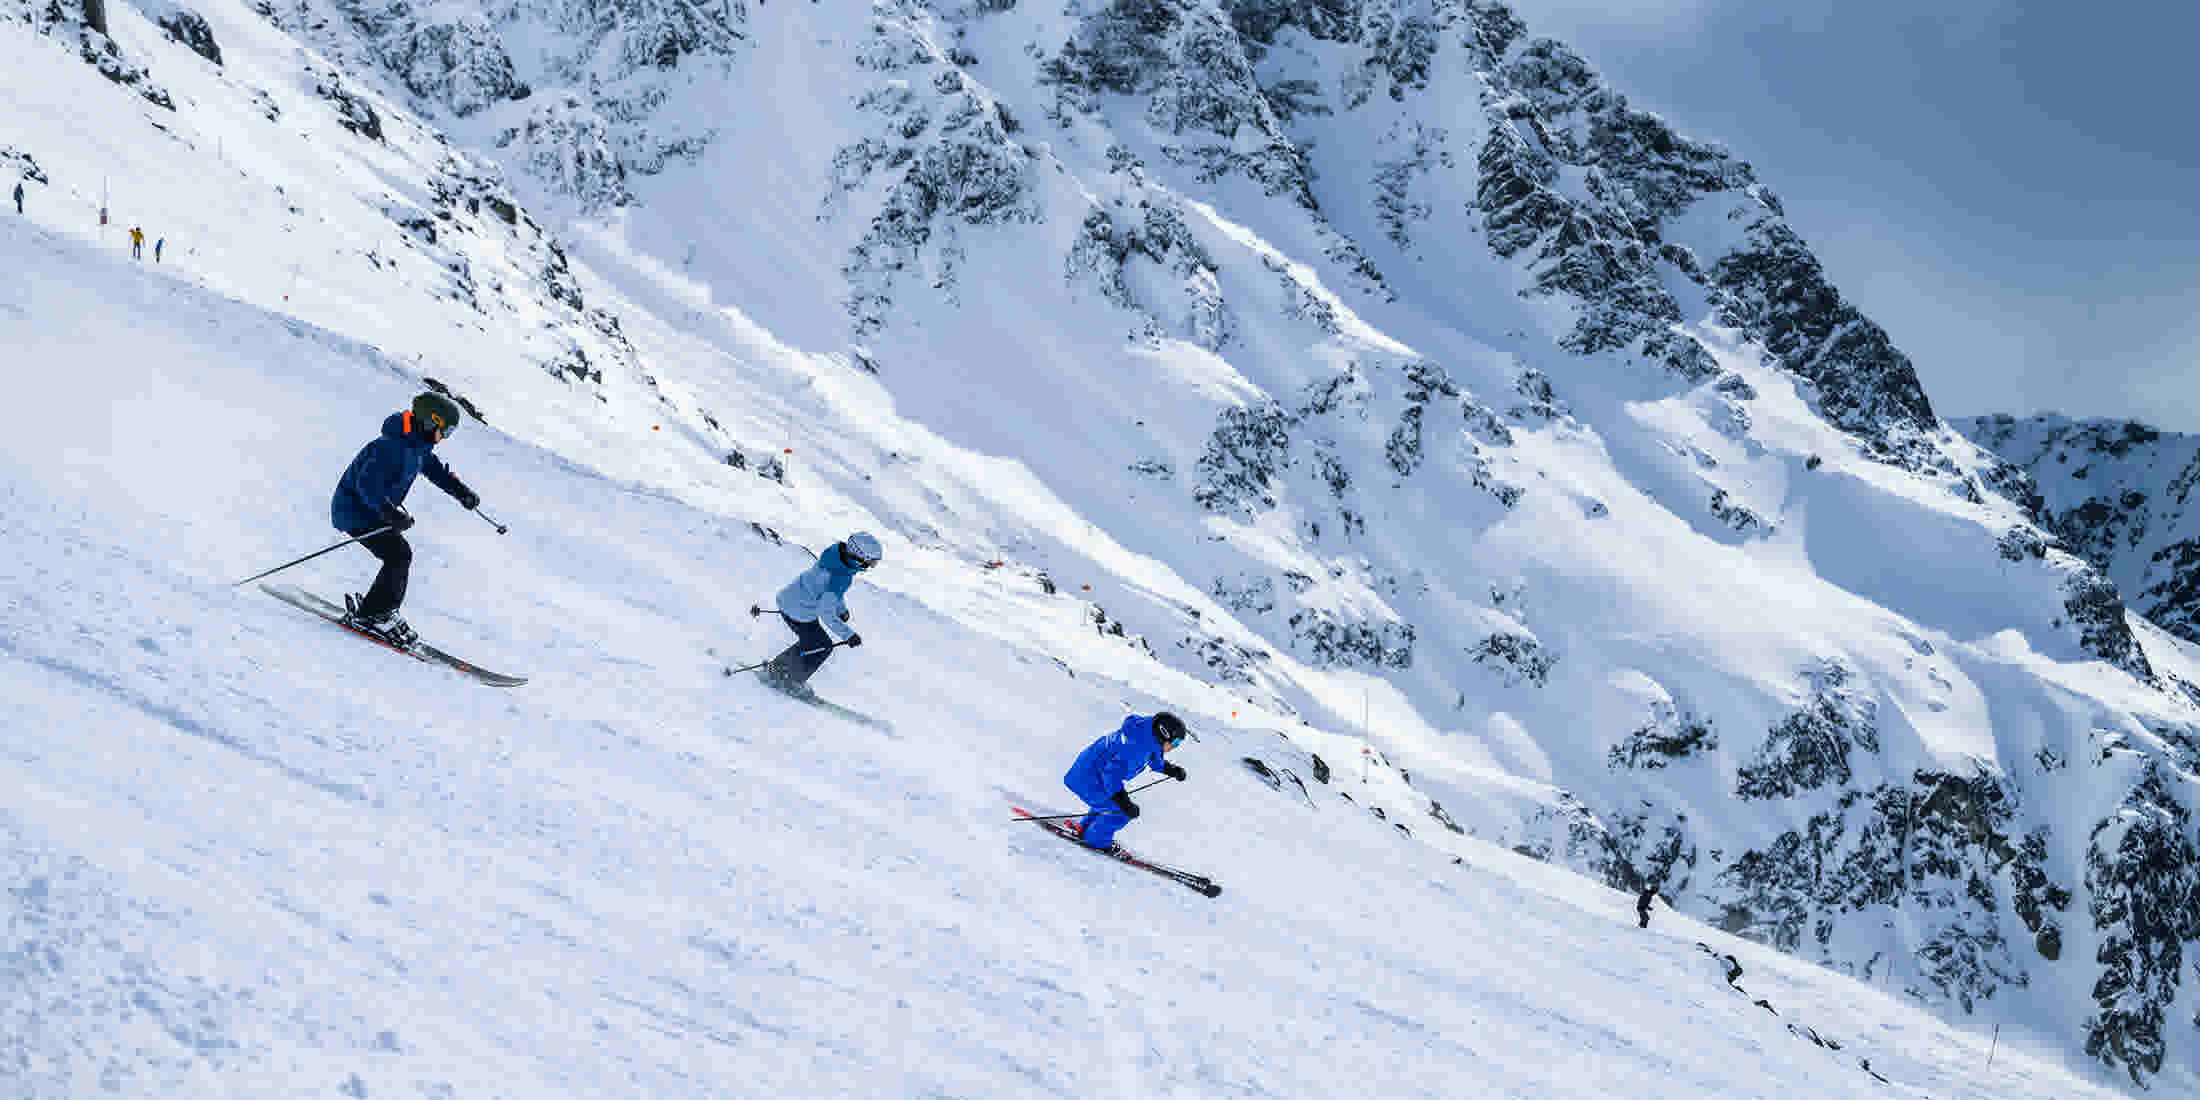 Ski and Snowboard lessons at Whistler Blackcomb